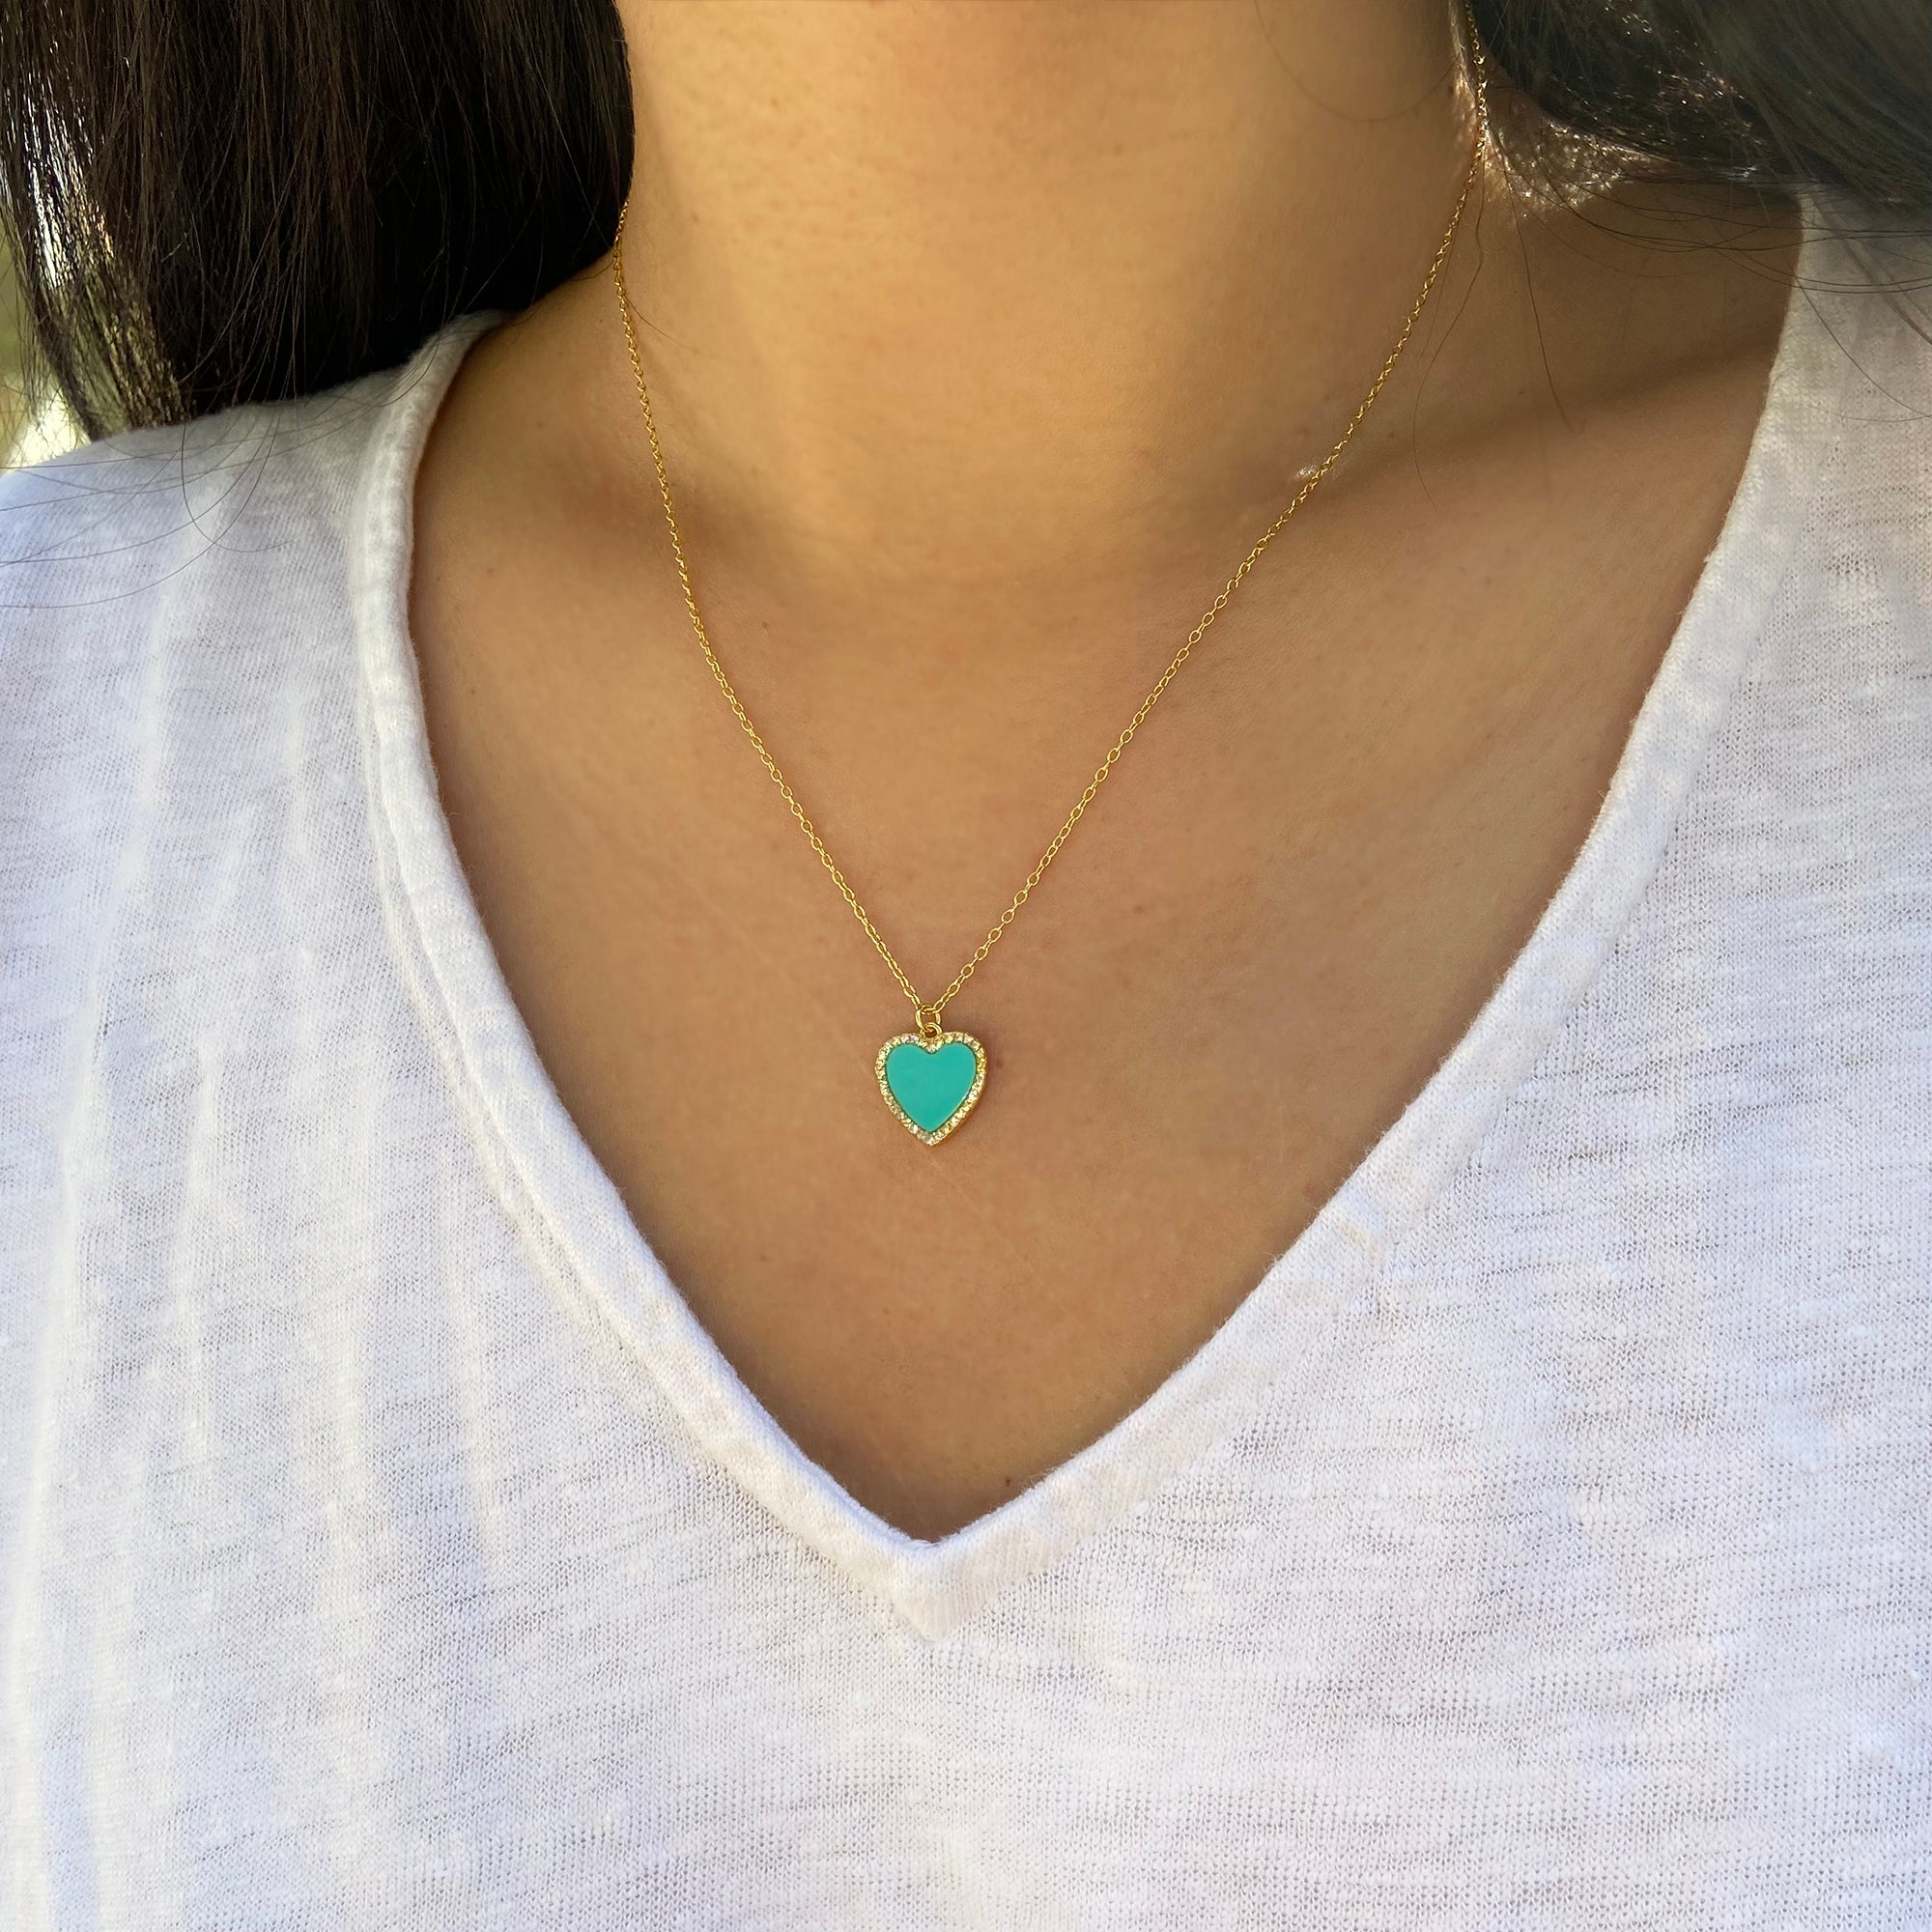 Turquoise Heart Necklace With Crystals